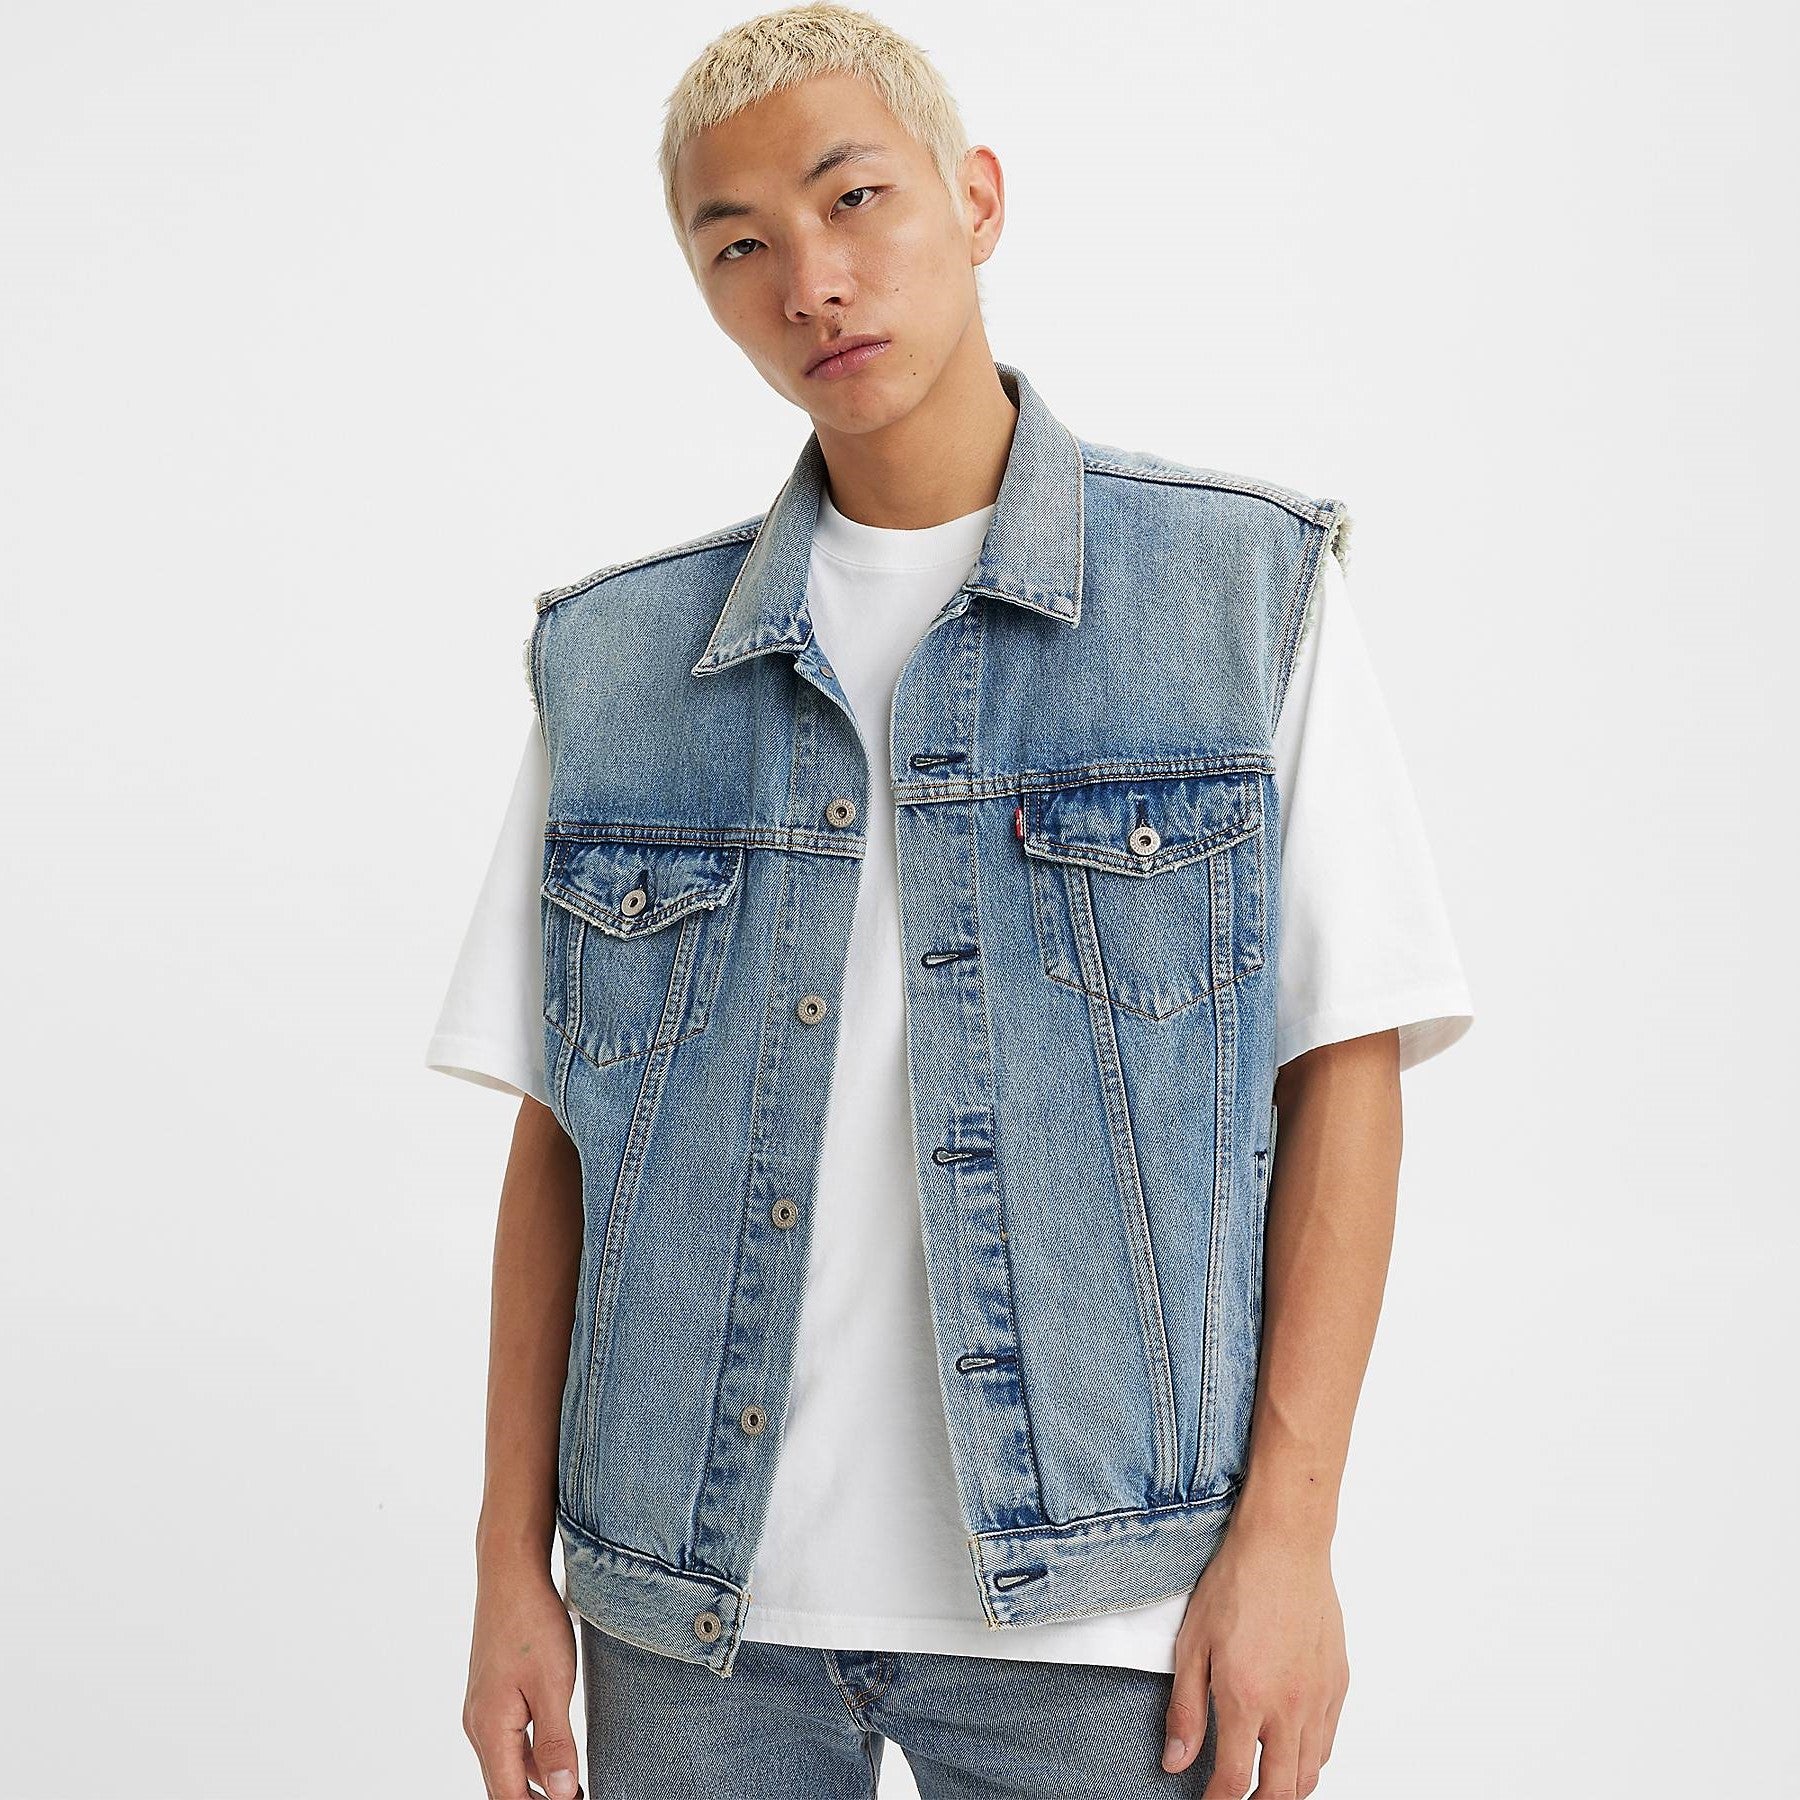 Levis – tagged 